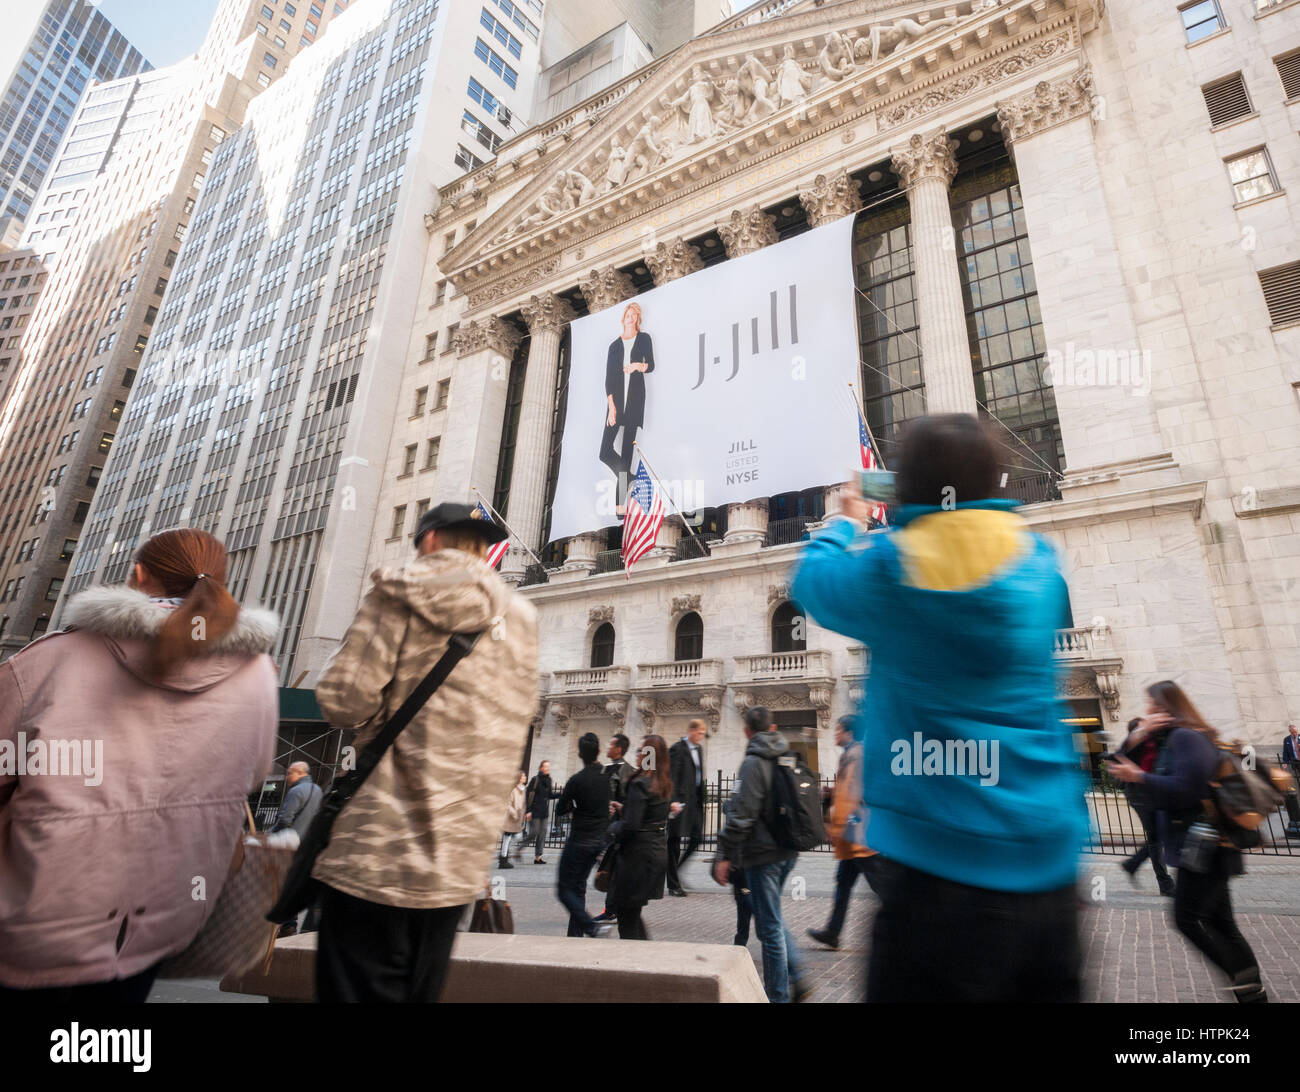 The New York Stock Exchange is decorated on Thursday, March 9, 2017 for the initial public offering of the women's wear retailer J. Jill. The Boston-based J. Jill is an omni-channel retailer of women's apparel with both ecommerce and over 270 stores. (© Richard B. Levine) Stock Photo